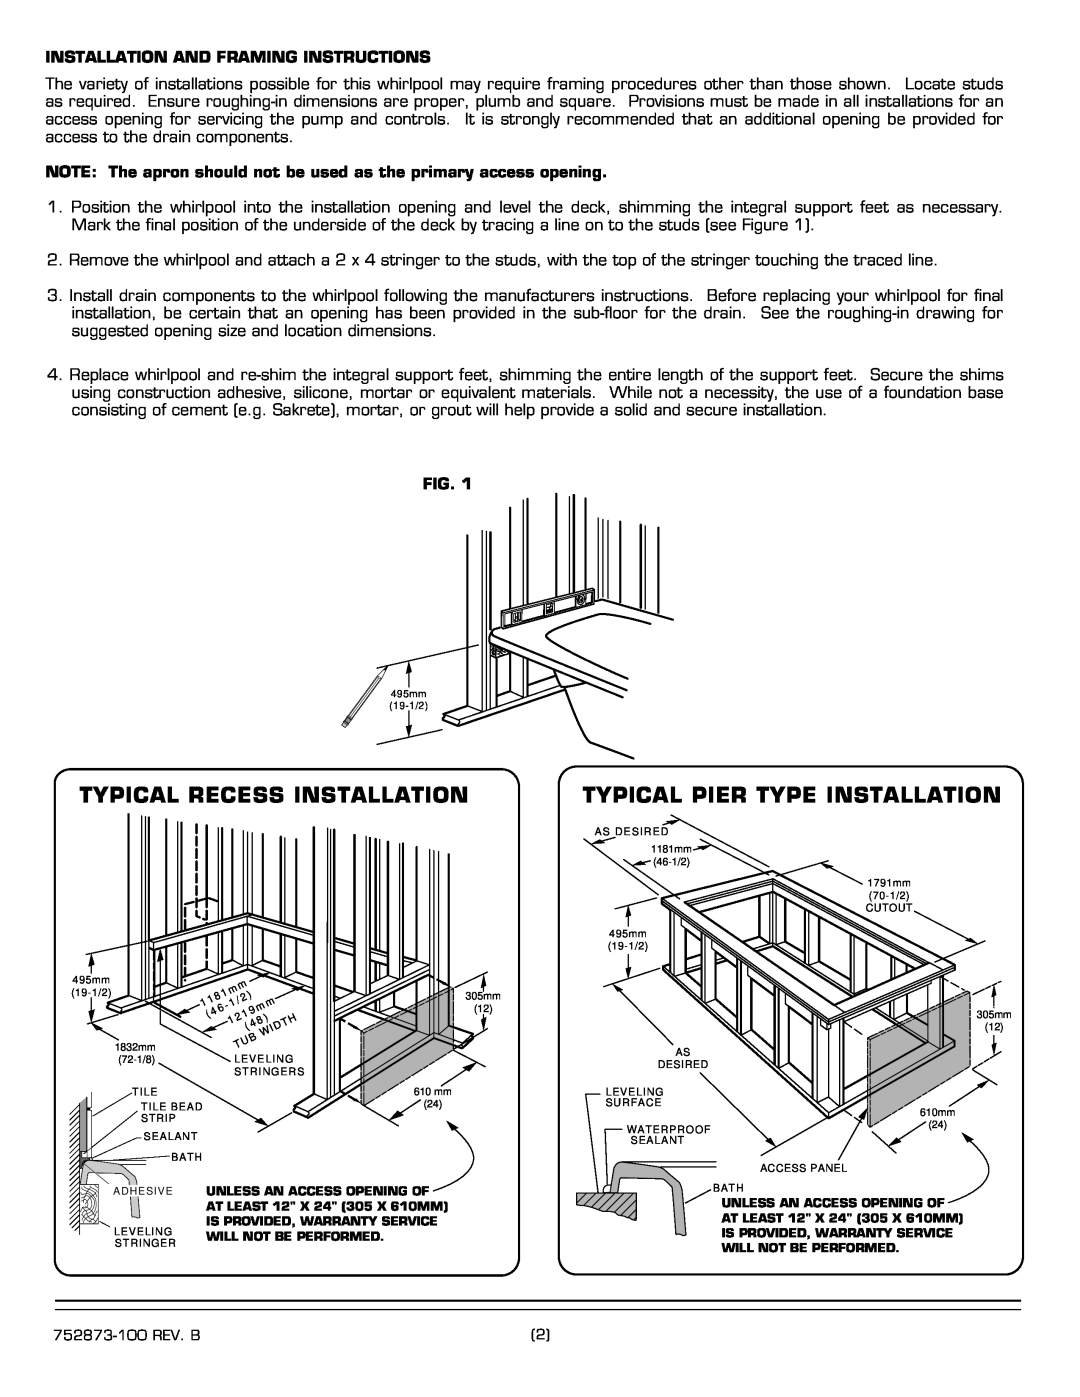 American Standard 2711E Typical Recess Installation, Typical Pier Type Installation, Installation And Framing Instructions 